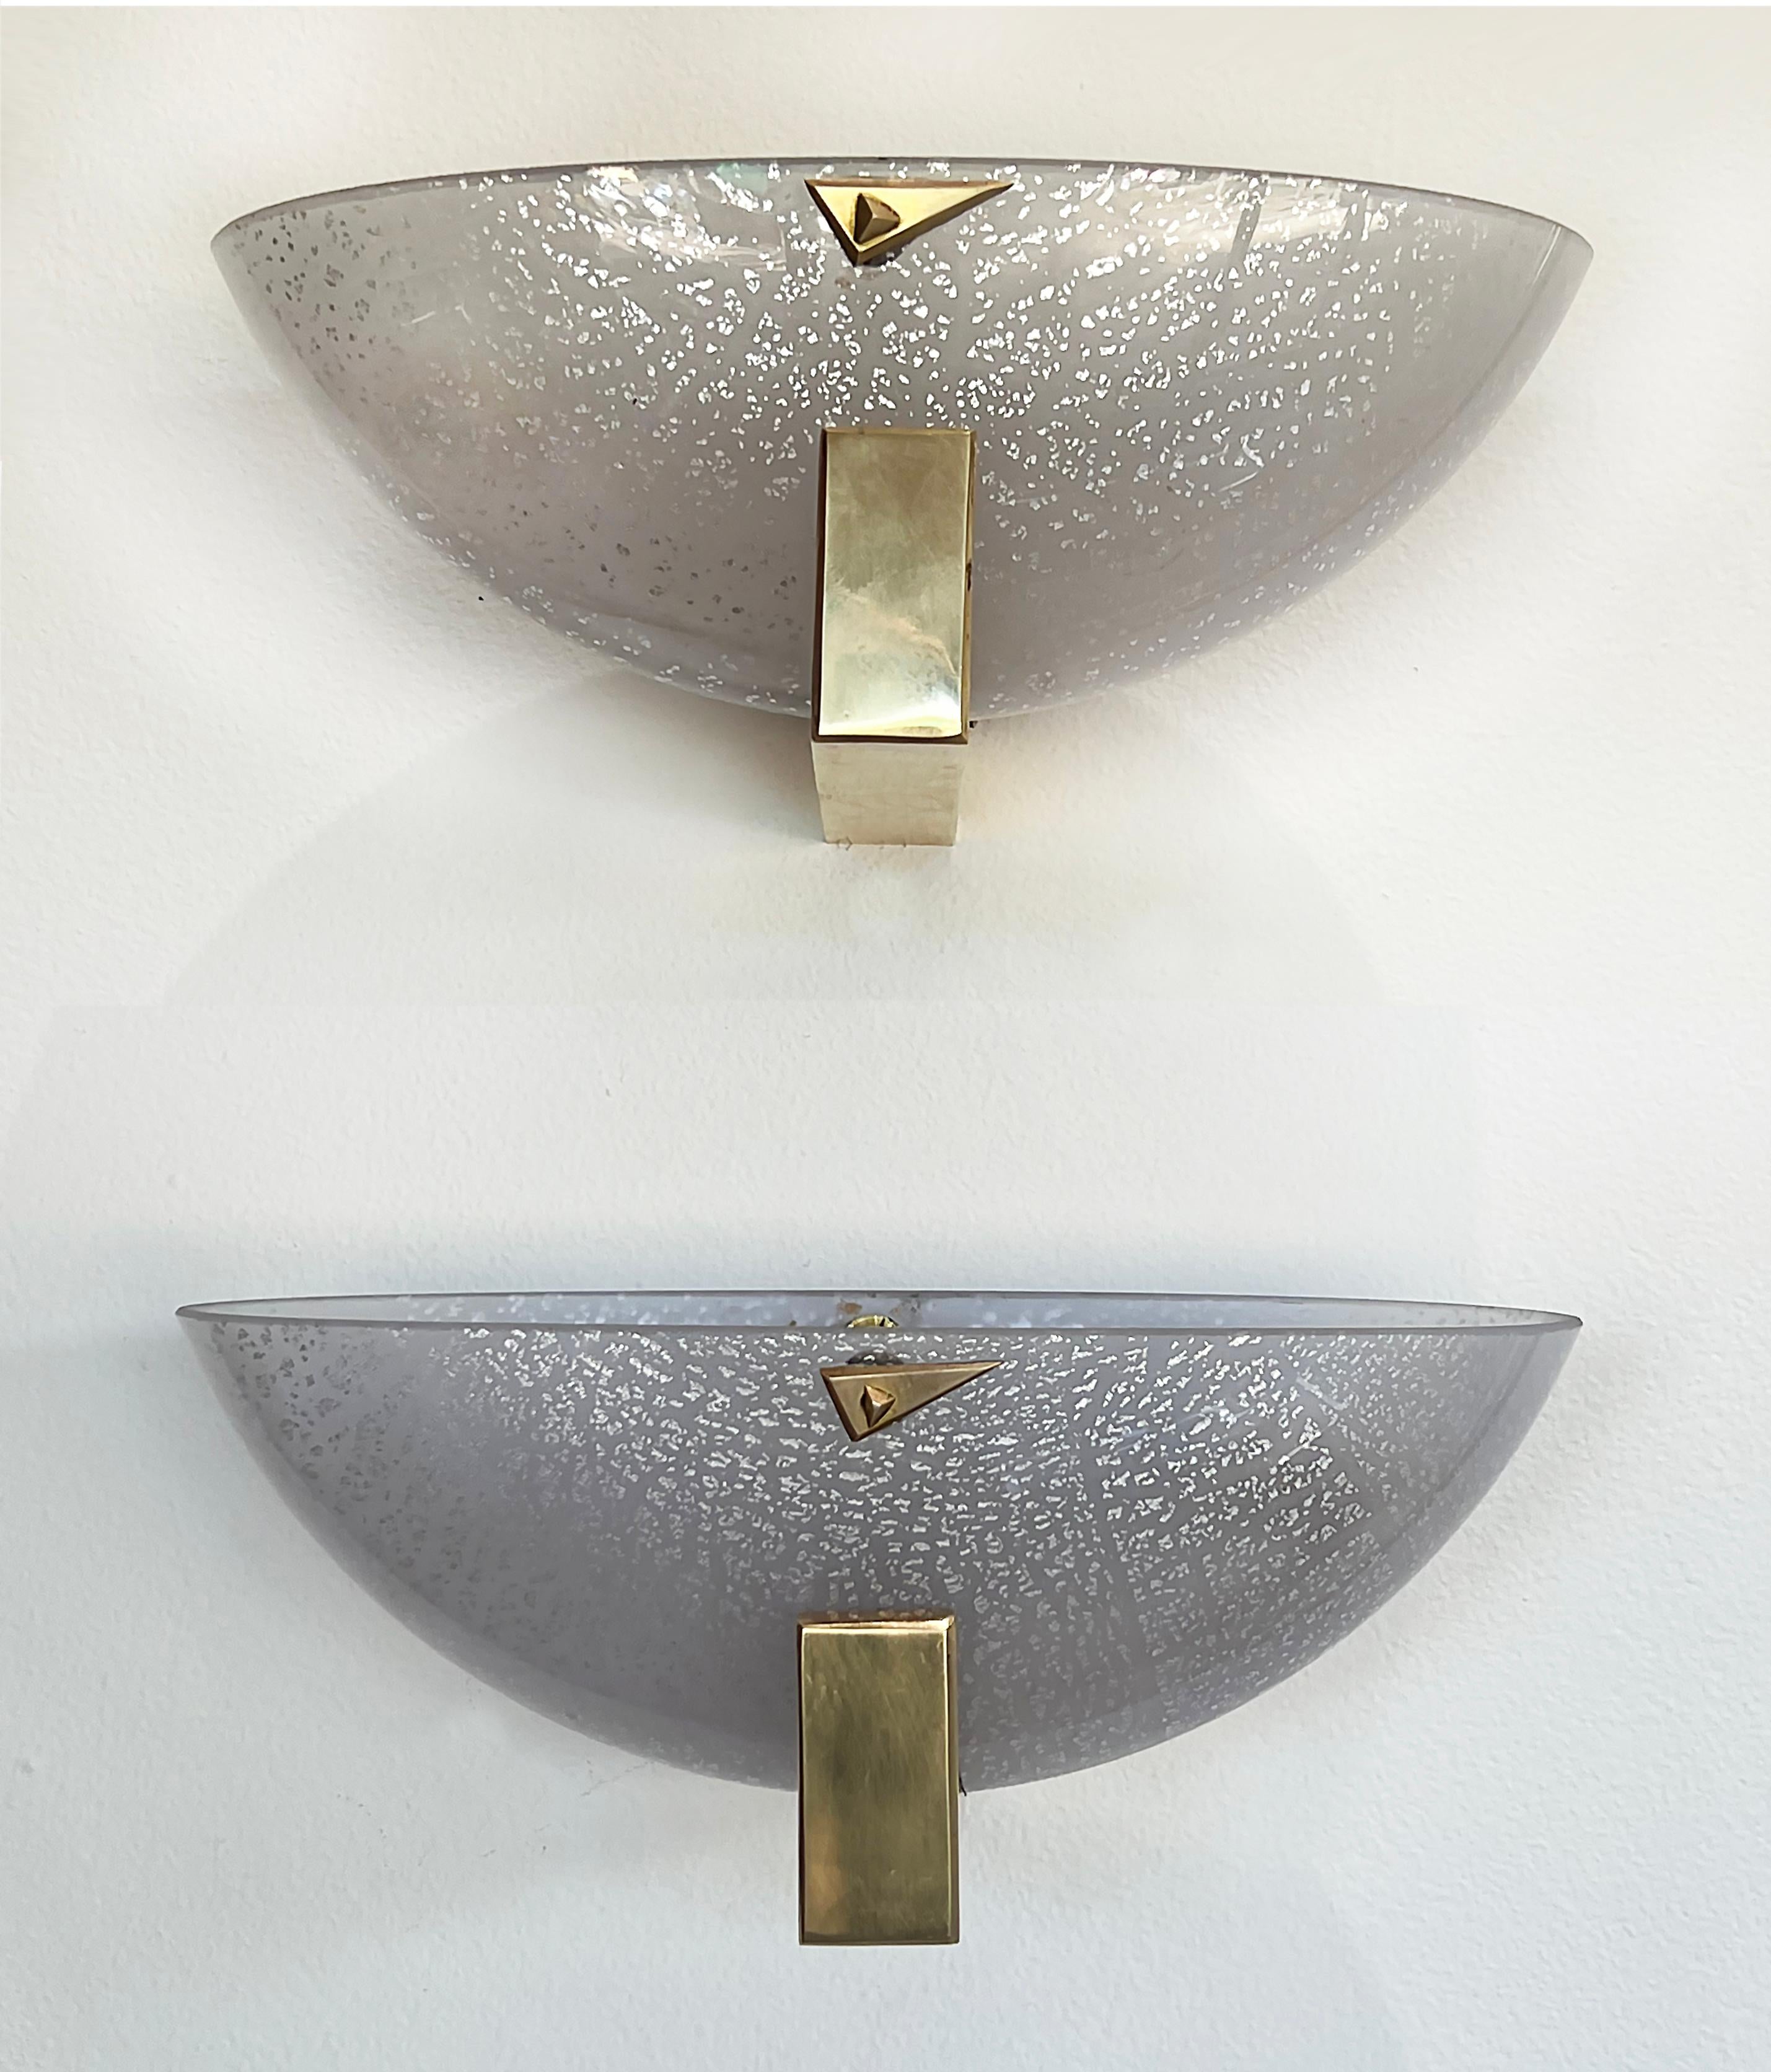 Barovier & Toso Murano glass Demilune sconces with Brass Details

Offered for sale is an elegant pair of Mid-century Modern Barovier & Toso sconces. The sconces have polished brass frames and accent detail and are fitted with Italian Murano glass